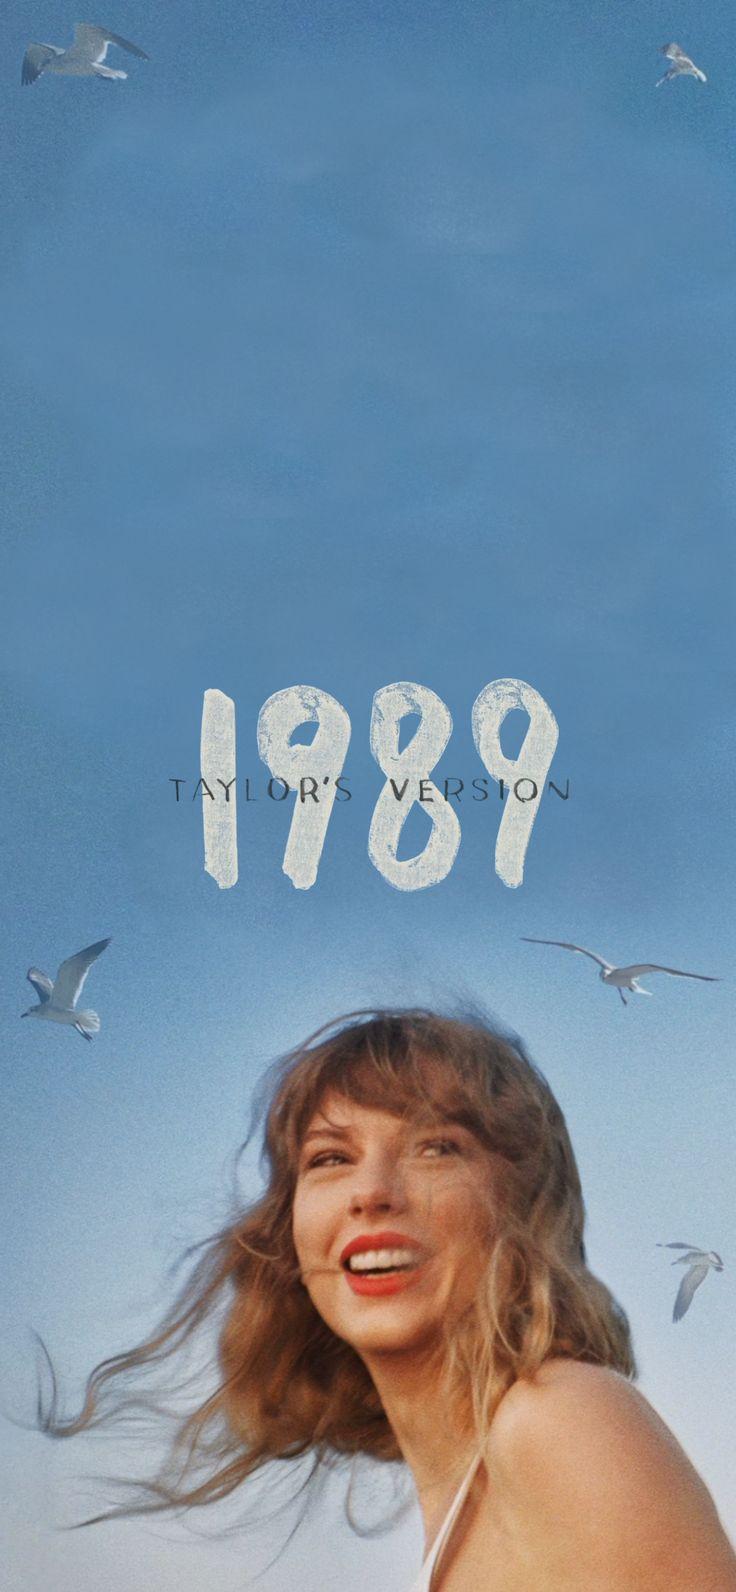 Taylor S Version Phone Wallpaper In Swift